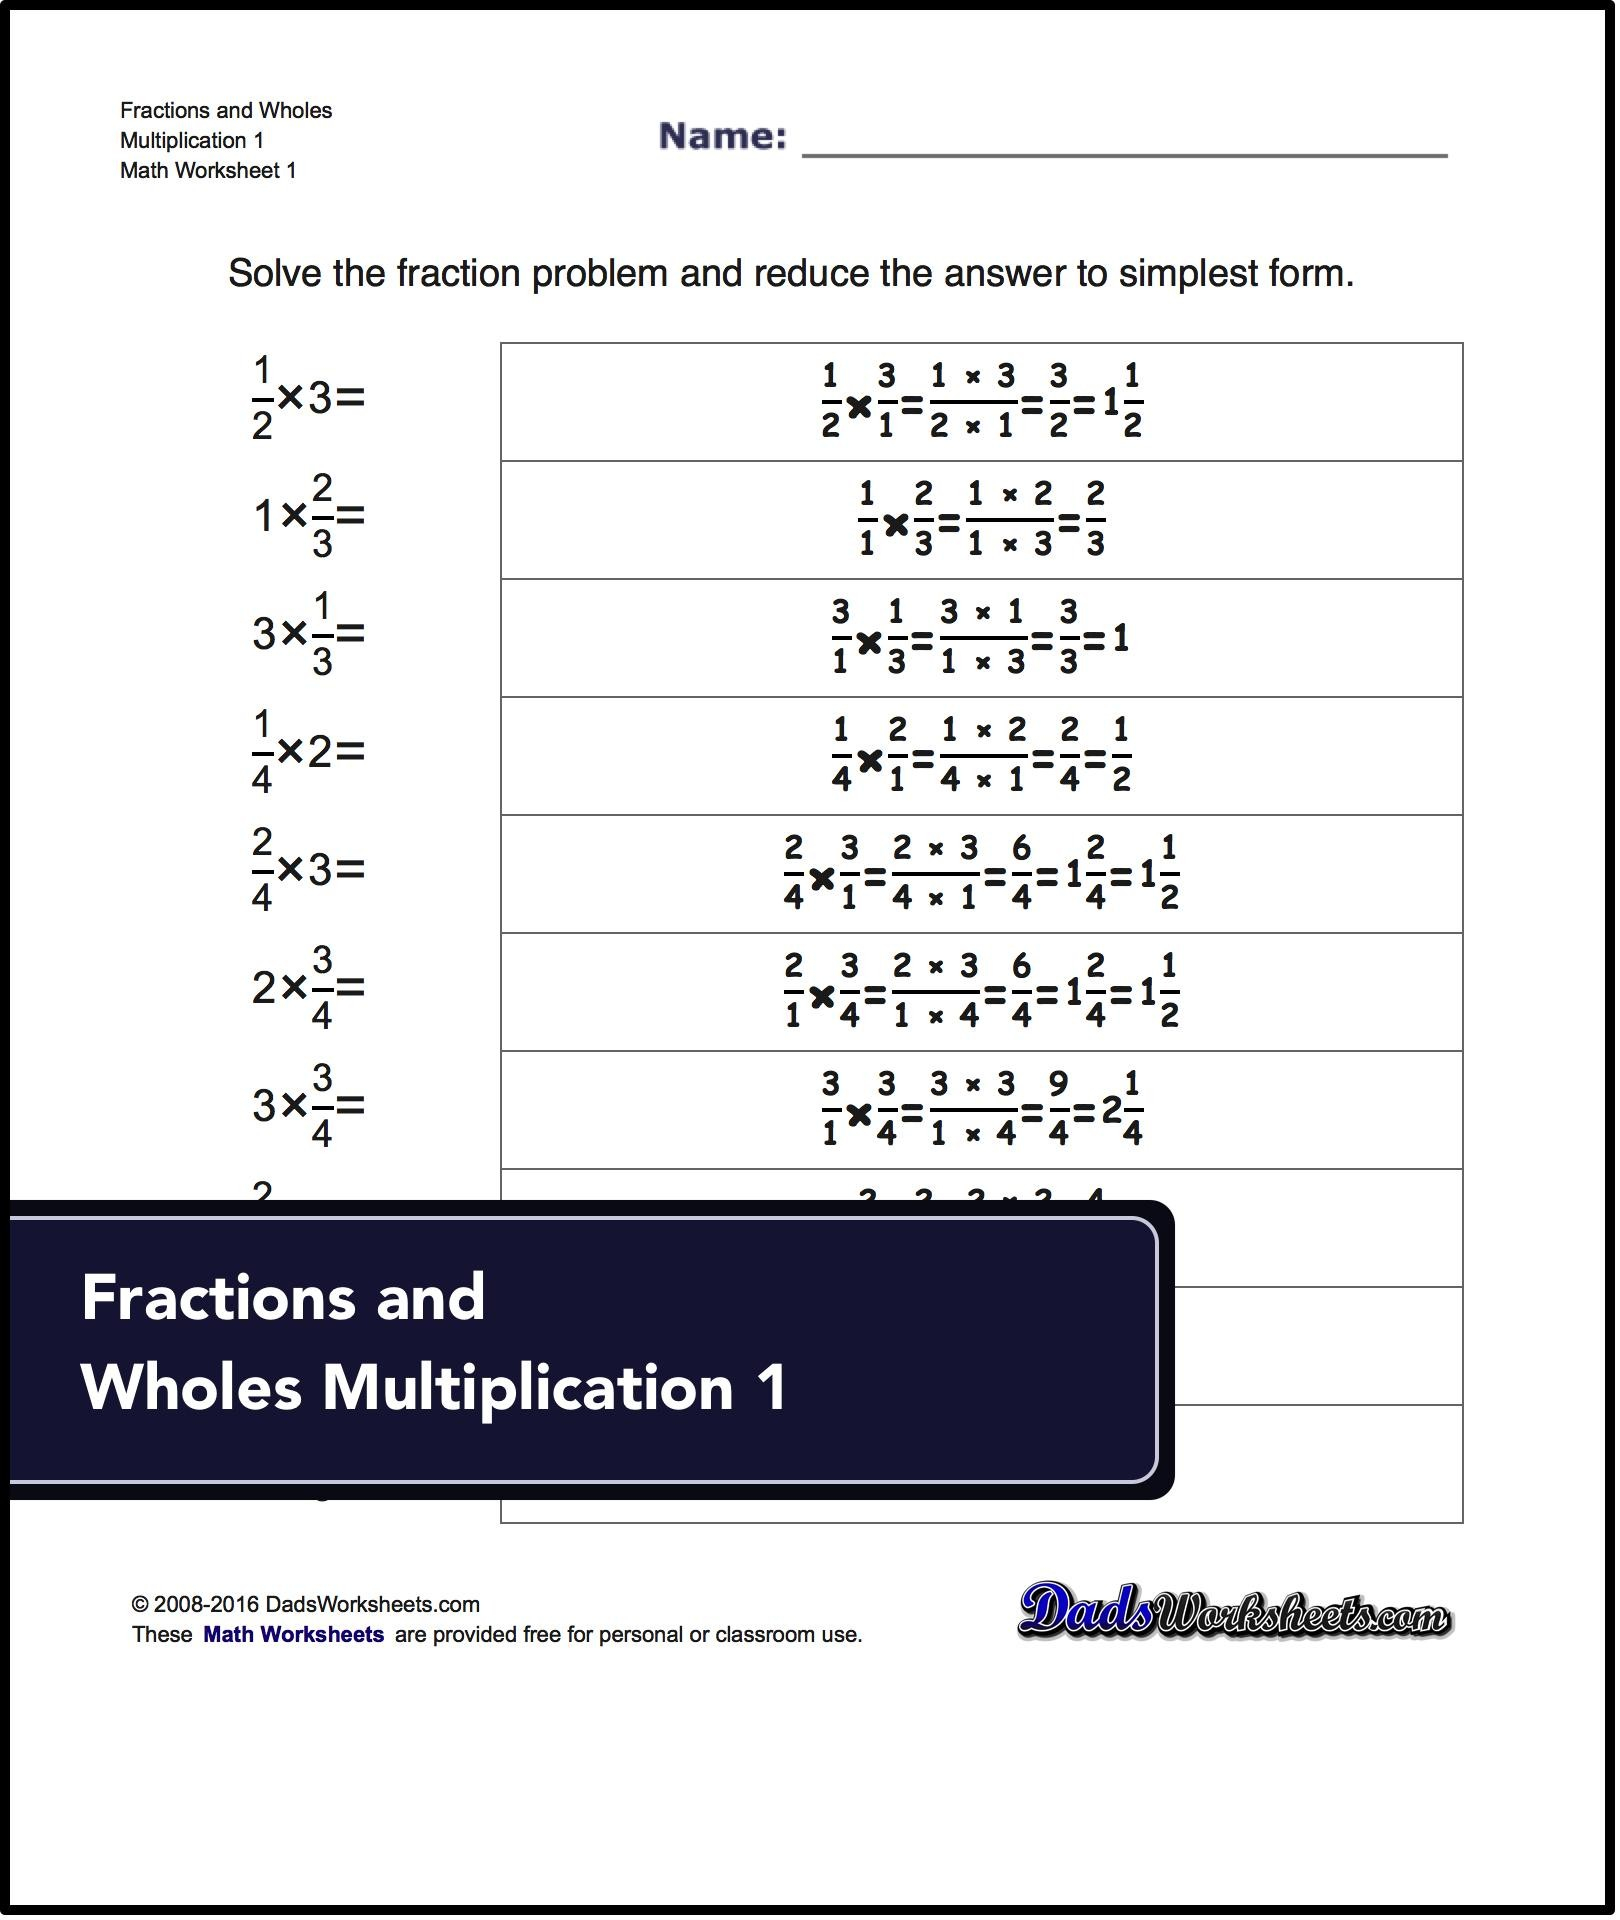 number-pattern-problems-using-only-addition-operations-visit-http-www-dadsworksheets-for